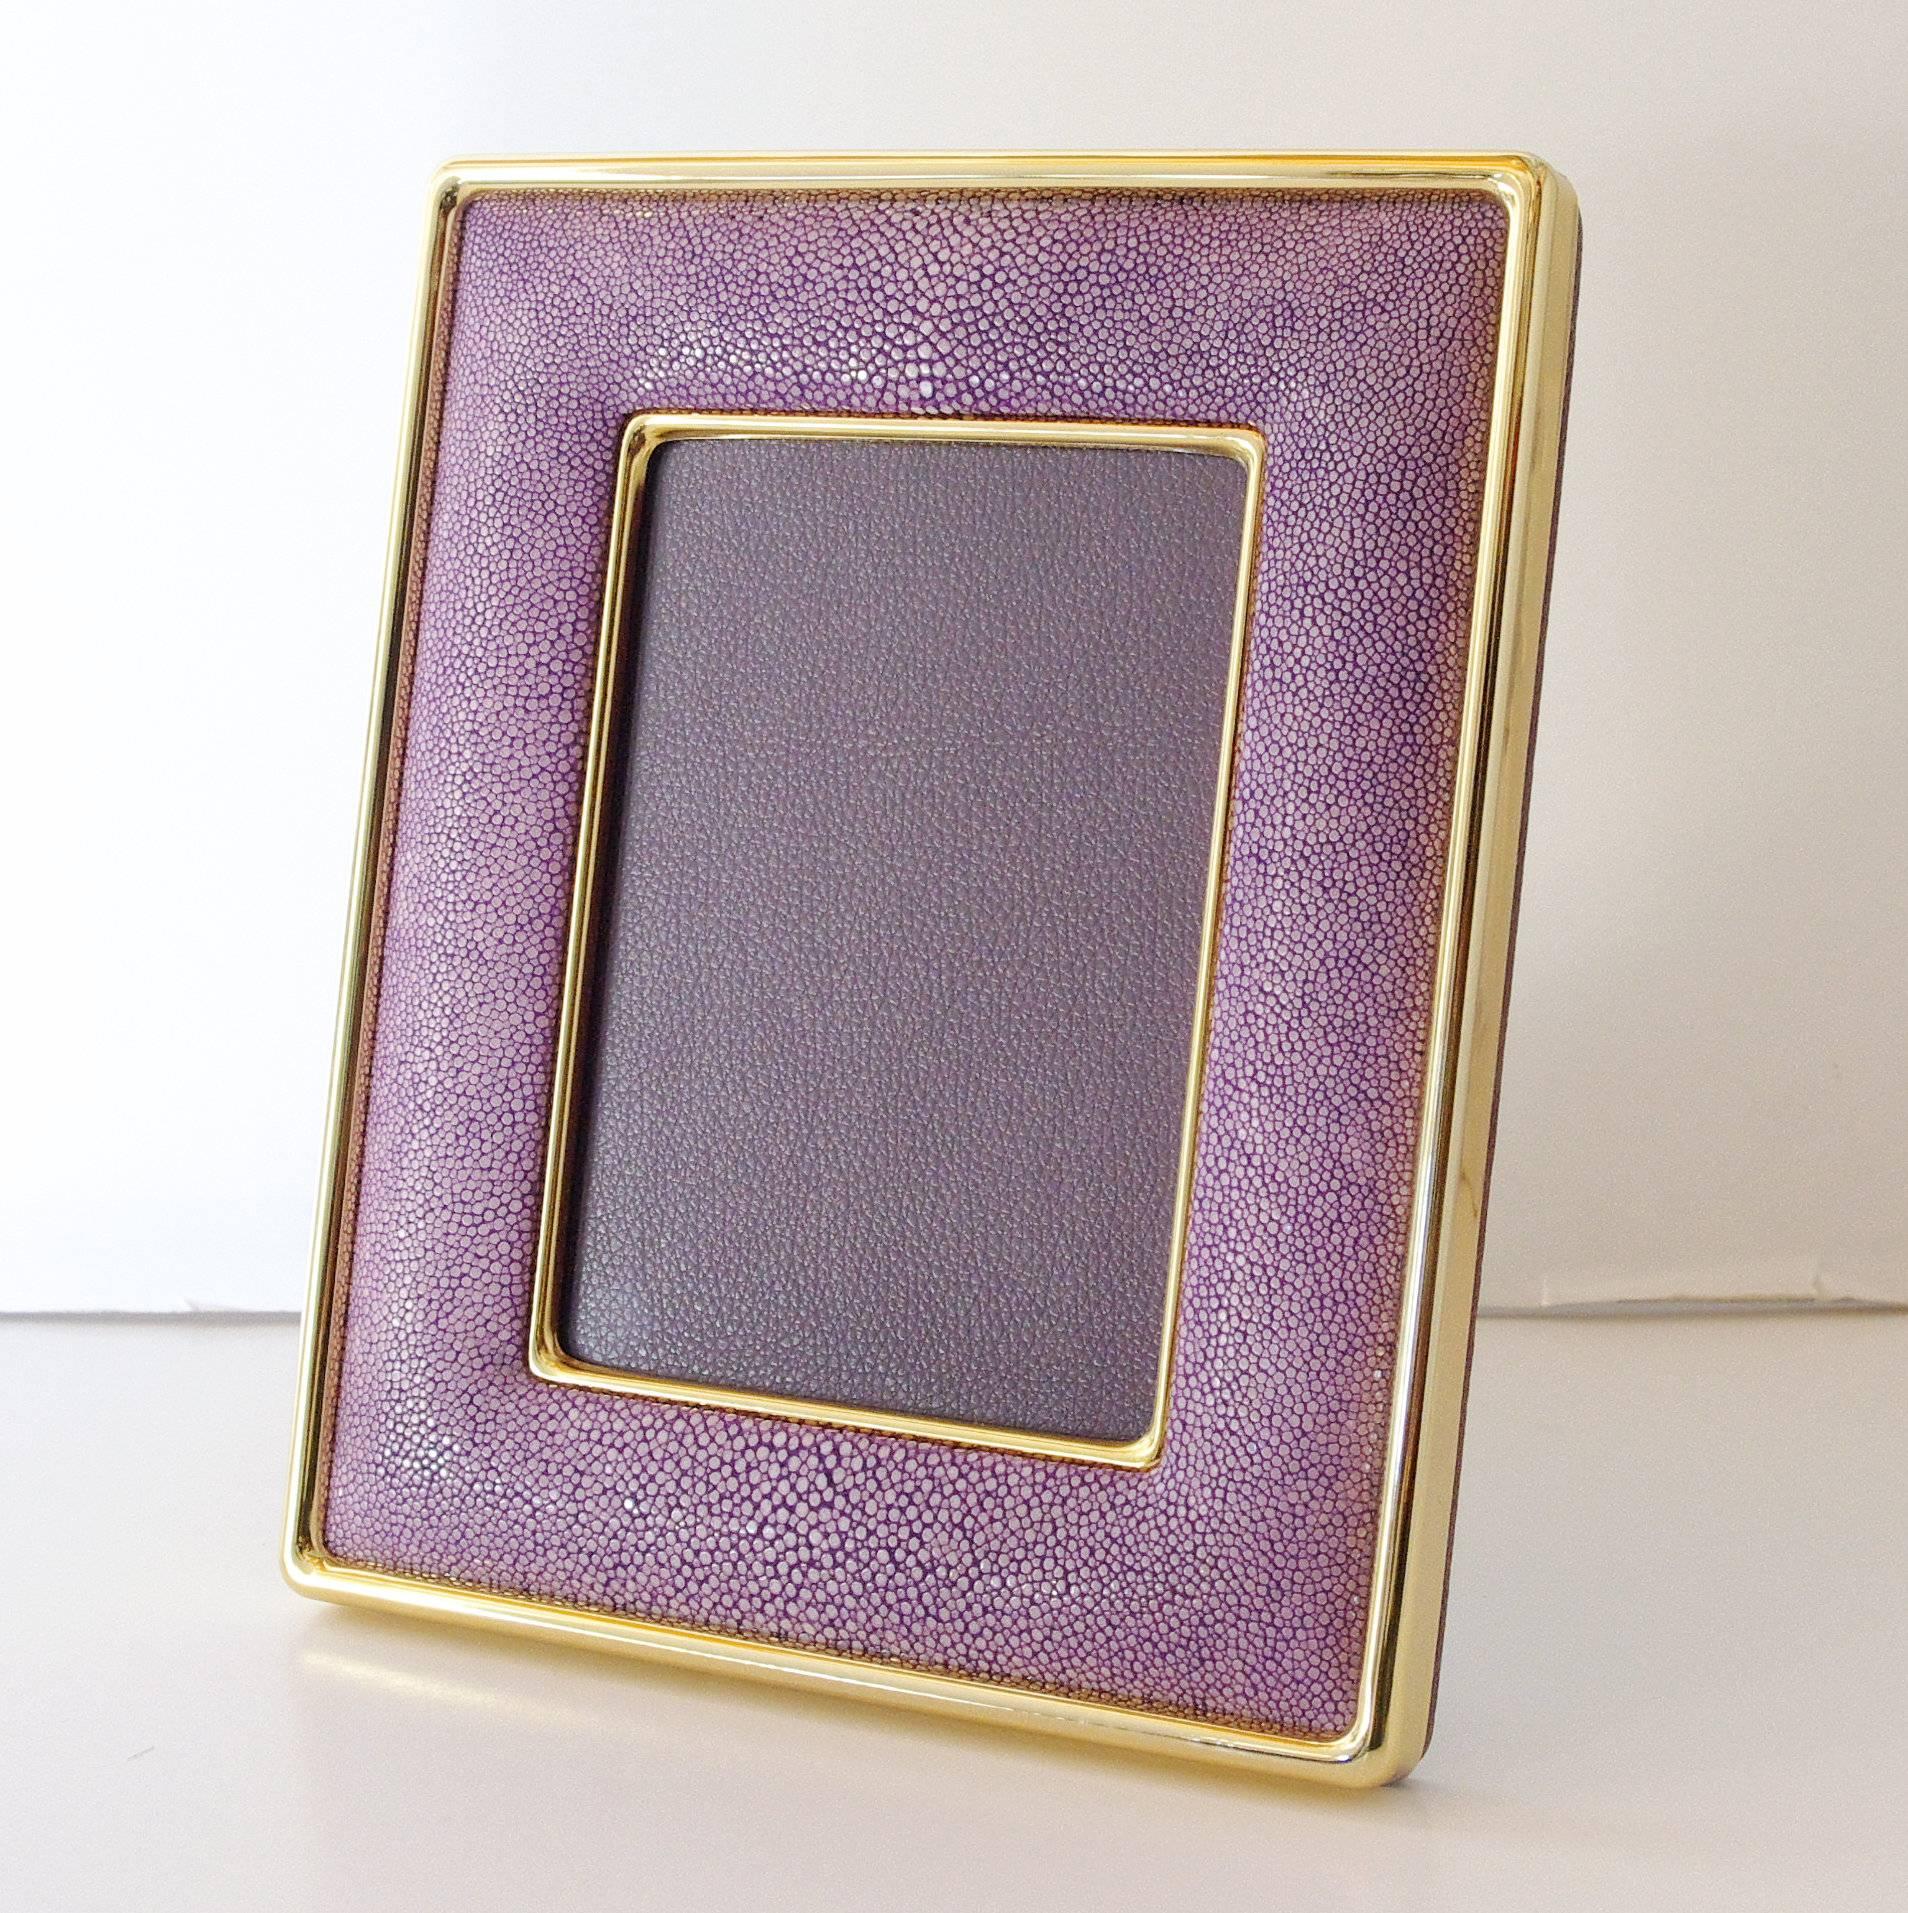 Italian lilac shagreen and gold-plated photo frame with presentation black leather box 
For photo size 5 inches x 7 inches
We have 2 available for immediate purchase / Made in Italy / Can also be custom ordered 
